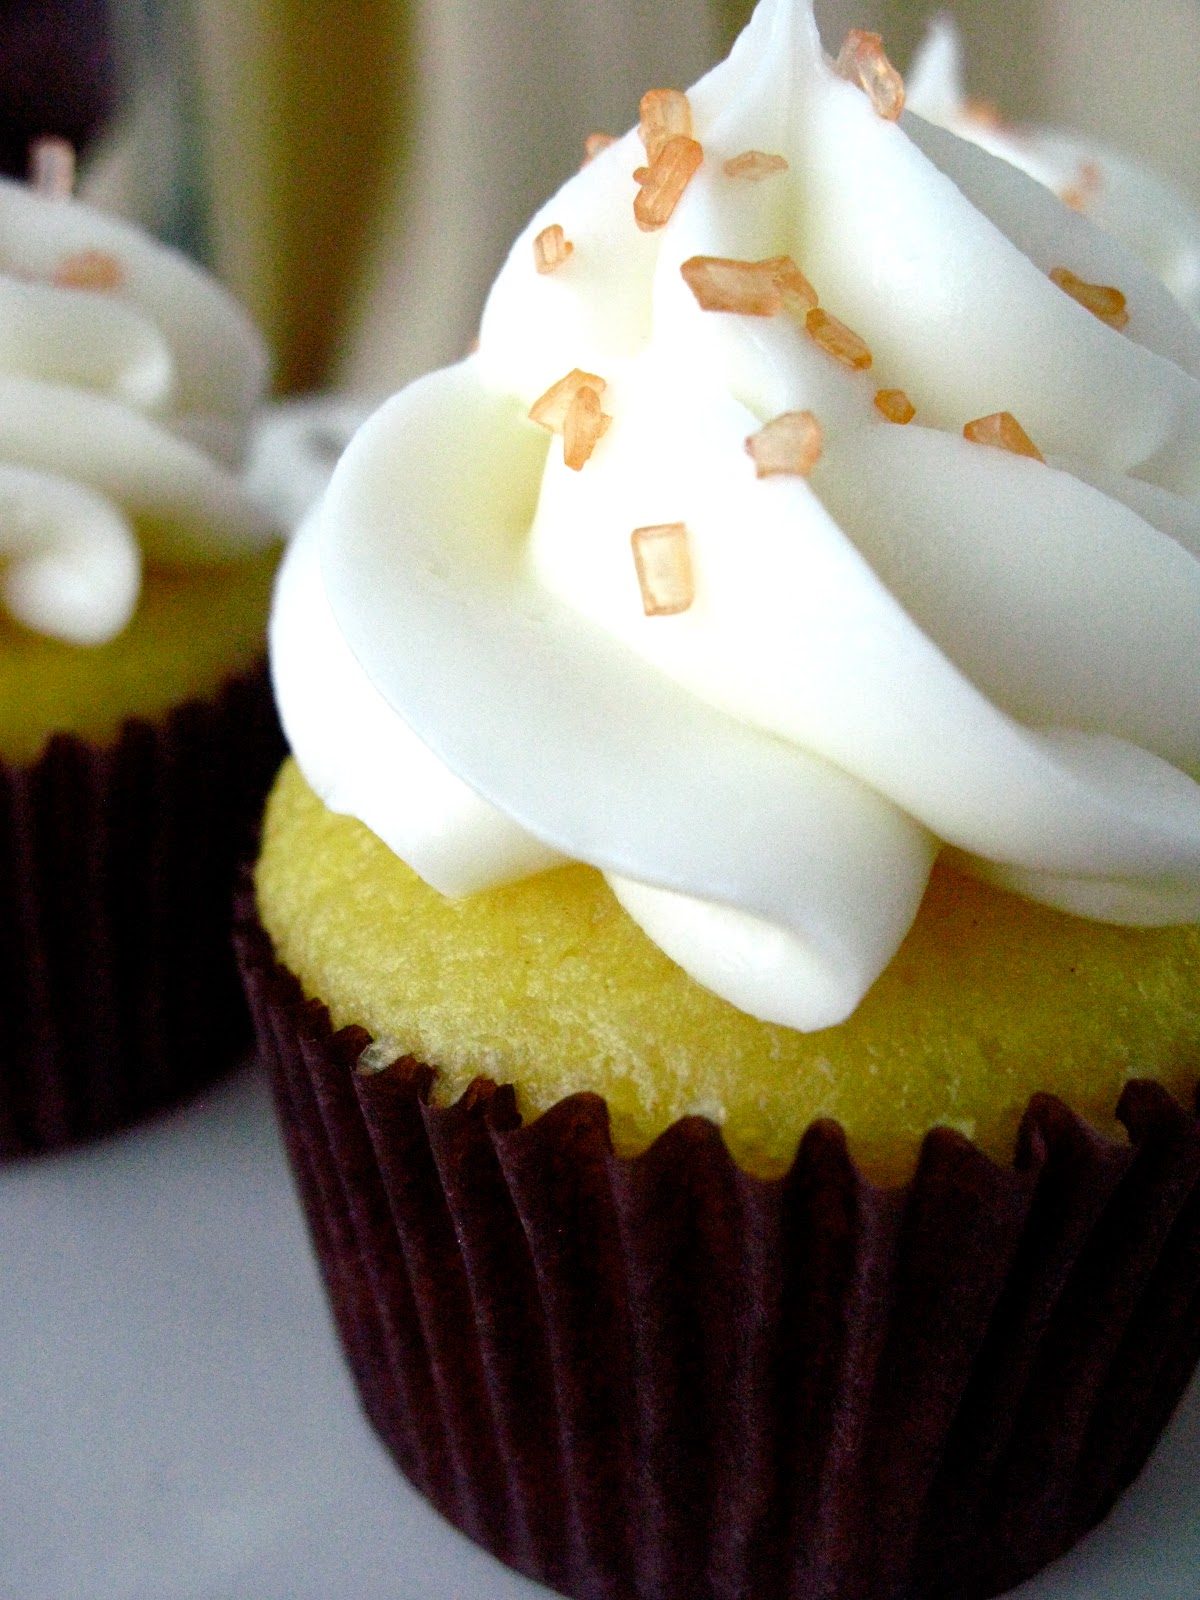 Mini Lemon Cupcakes with Cream Cheese Frosting - Your Cup 